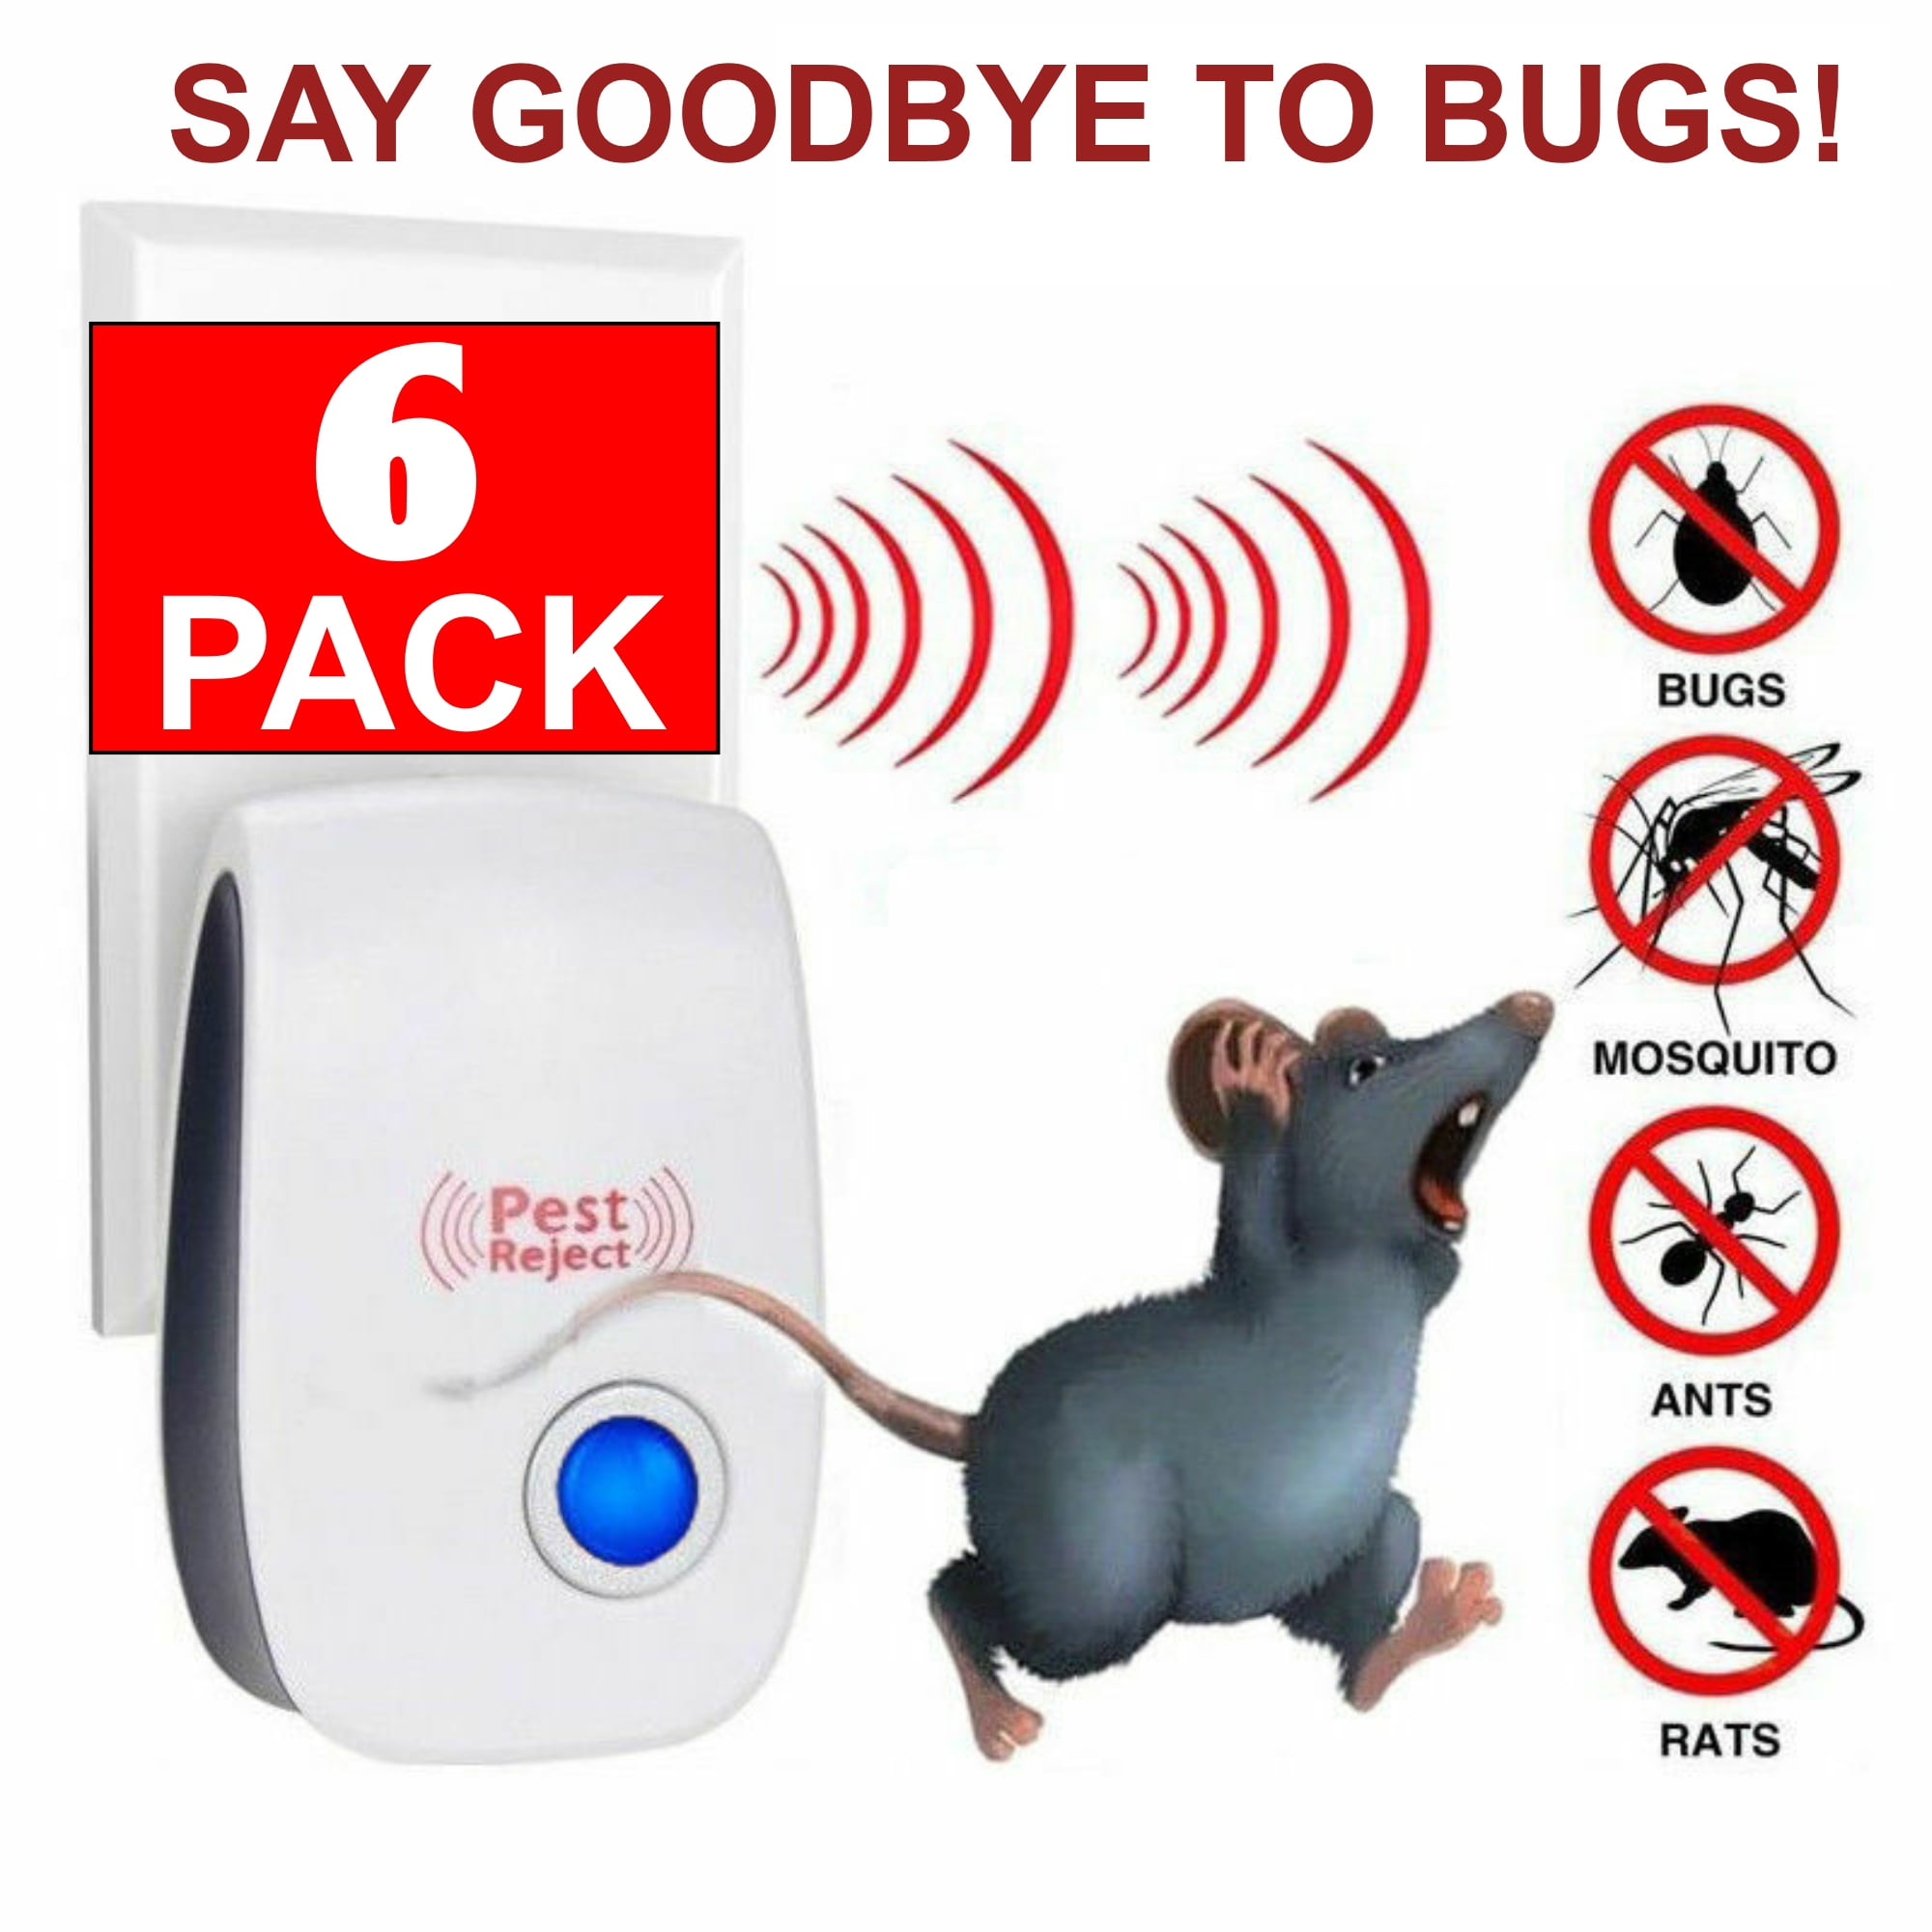 6 Pack Ultrasonic Pest Repeller Control Electronic Repellent Mice Rat Reject 